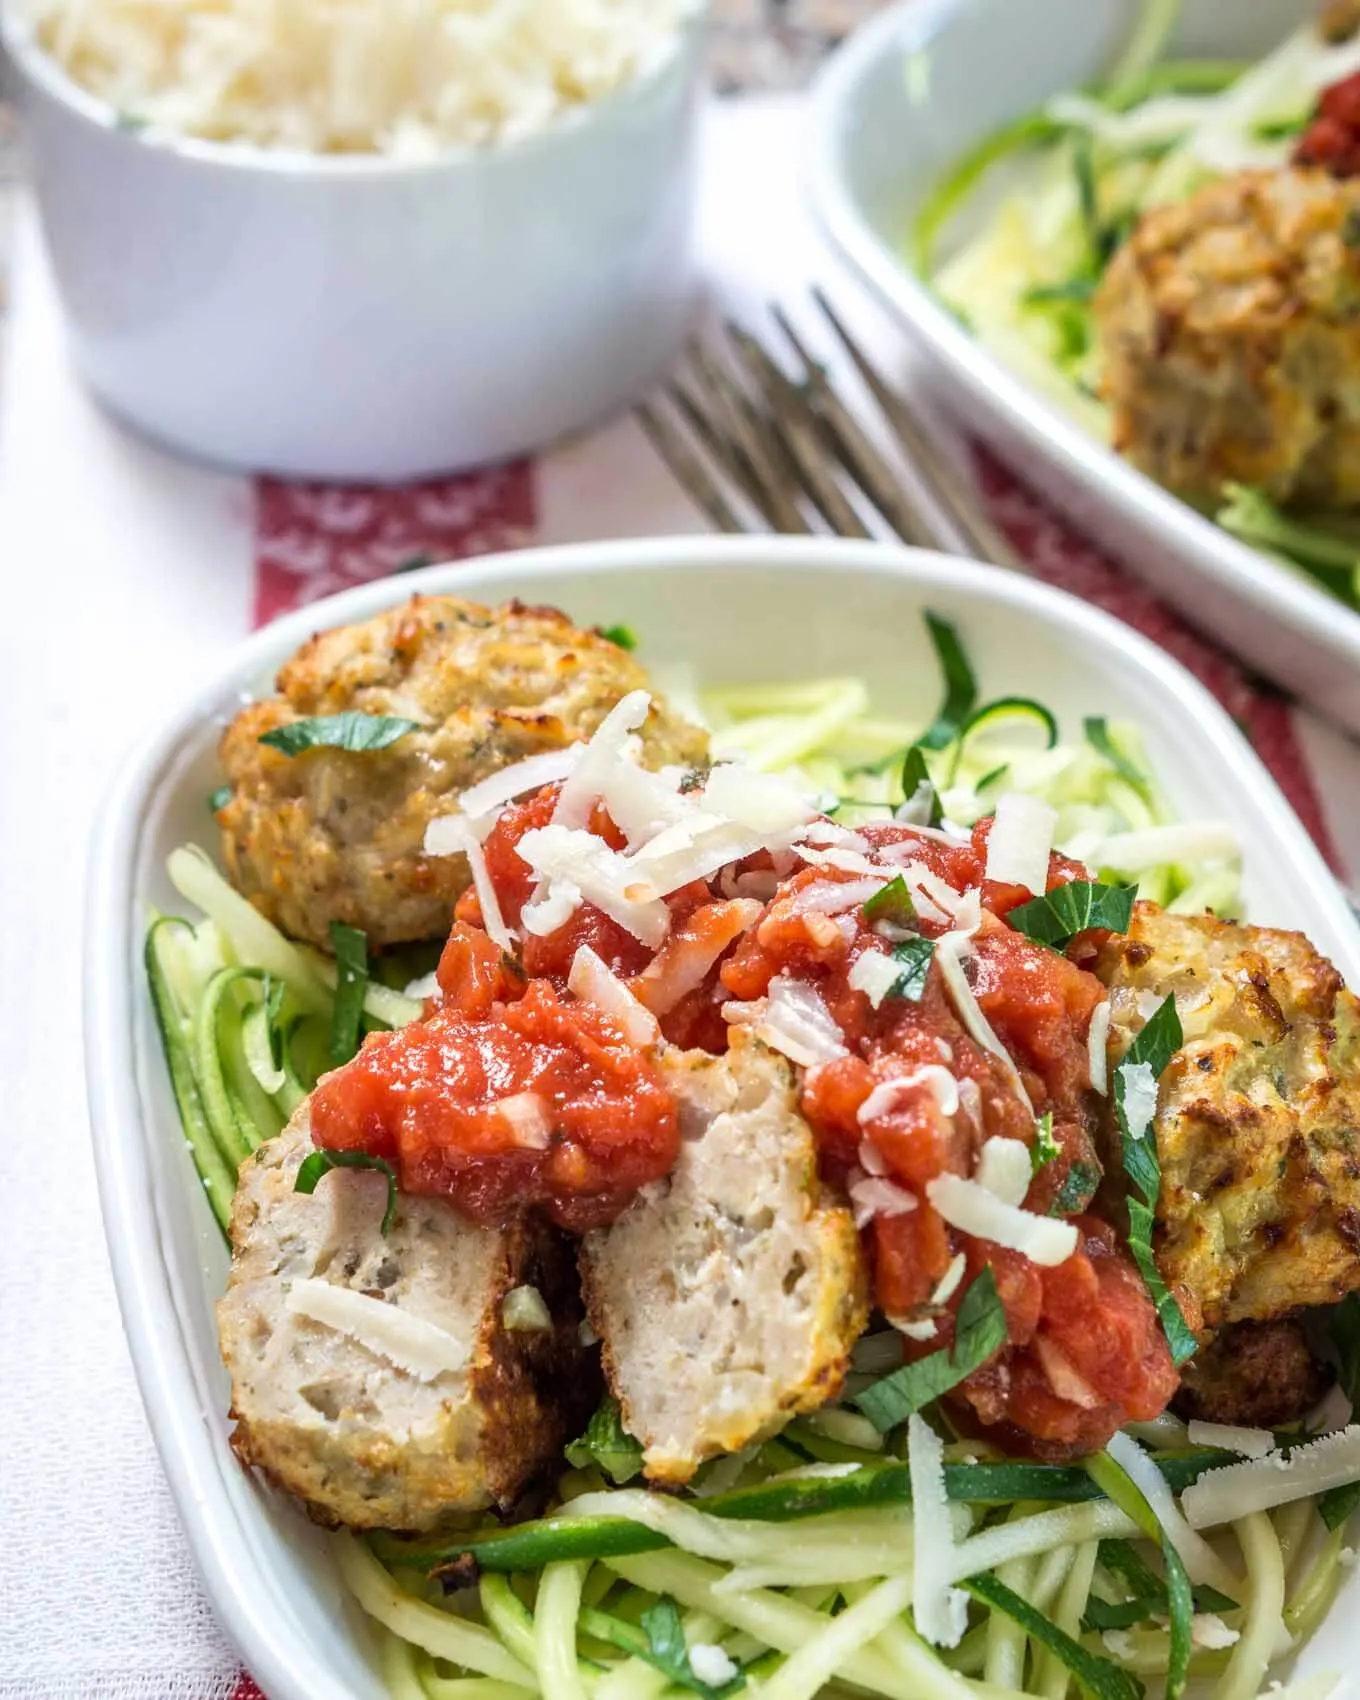 Top view of a white bowl of spiralized zucchini topped with chicken meatballs and marinara. Forks and another dish sit in the background.